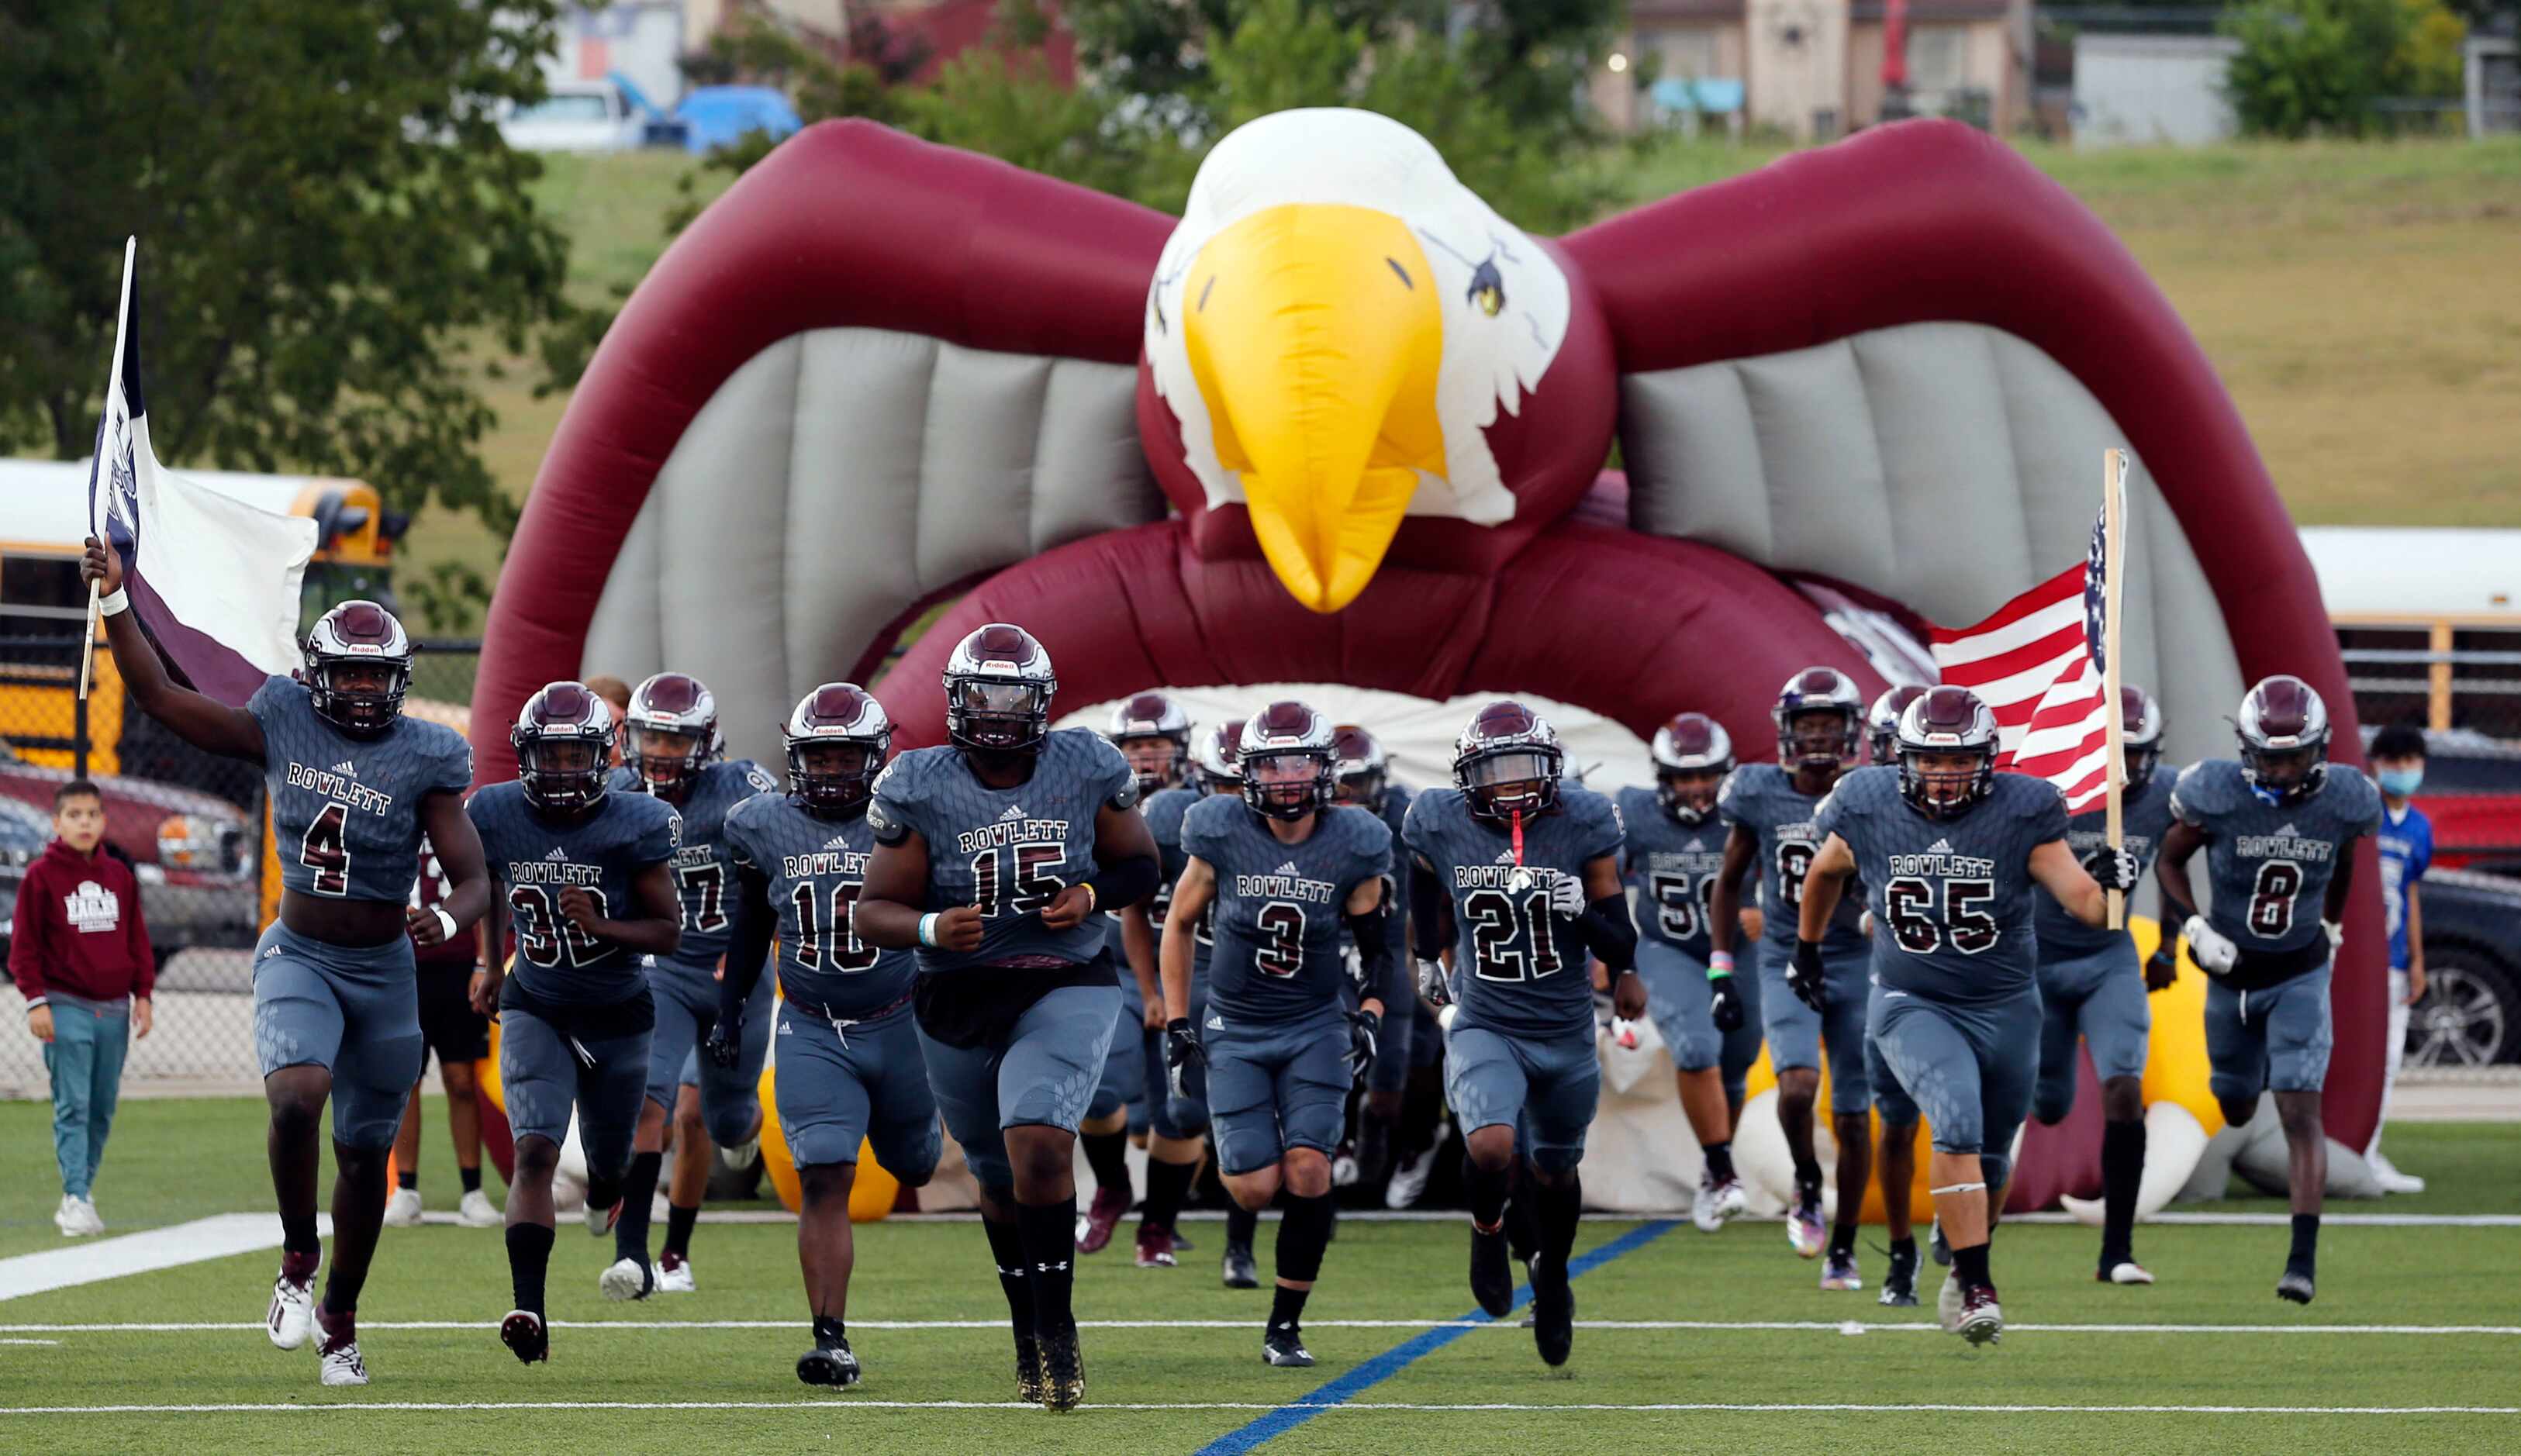 The Rowlett football enters the field before the start of the first half of a high school...